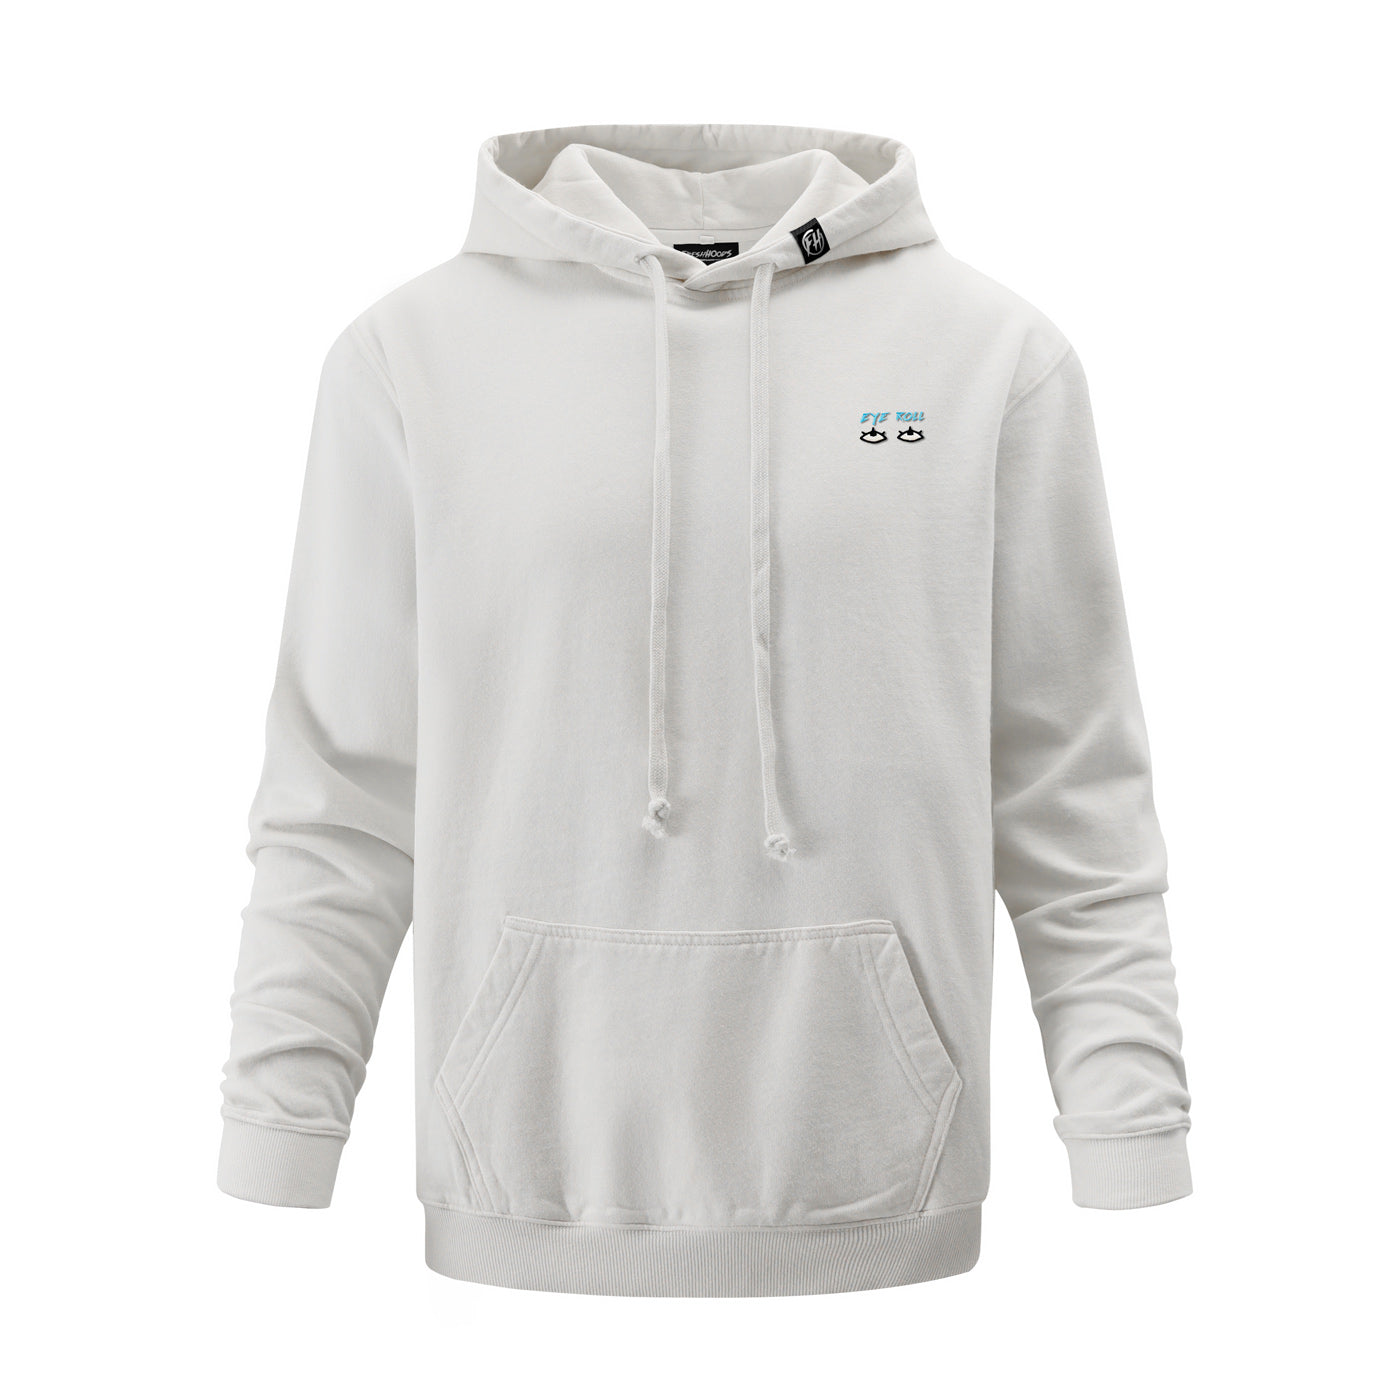 Hooded Sweatshirt with Back Embroidery - The Handkerchief Shop